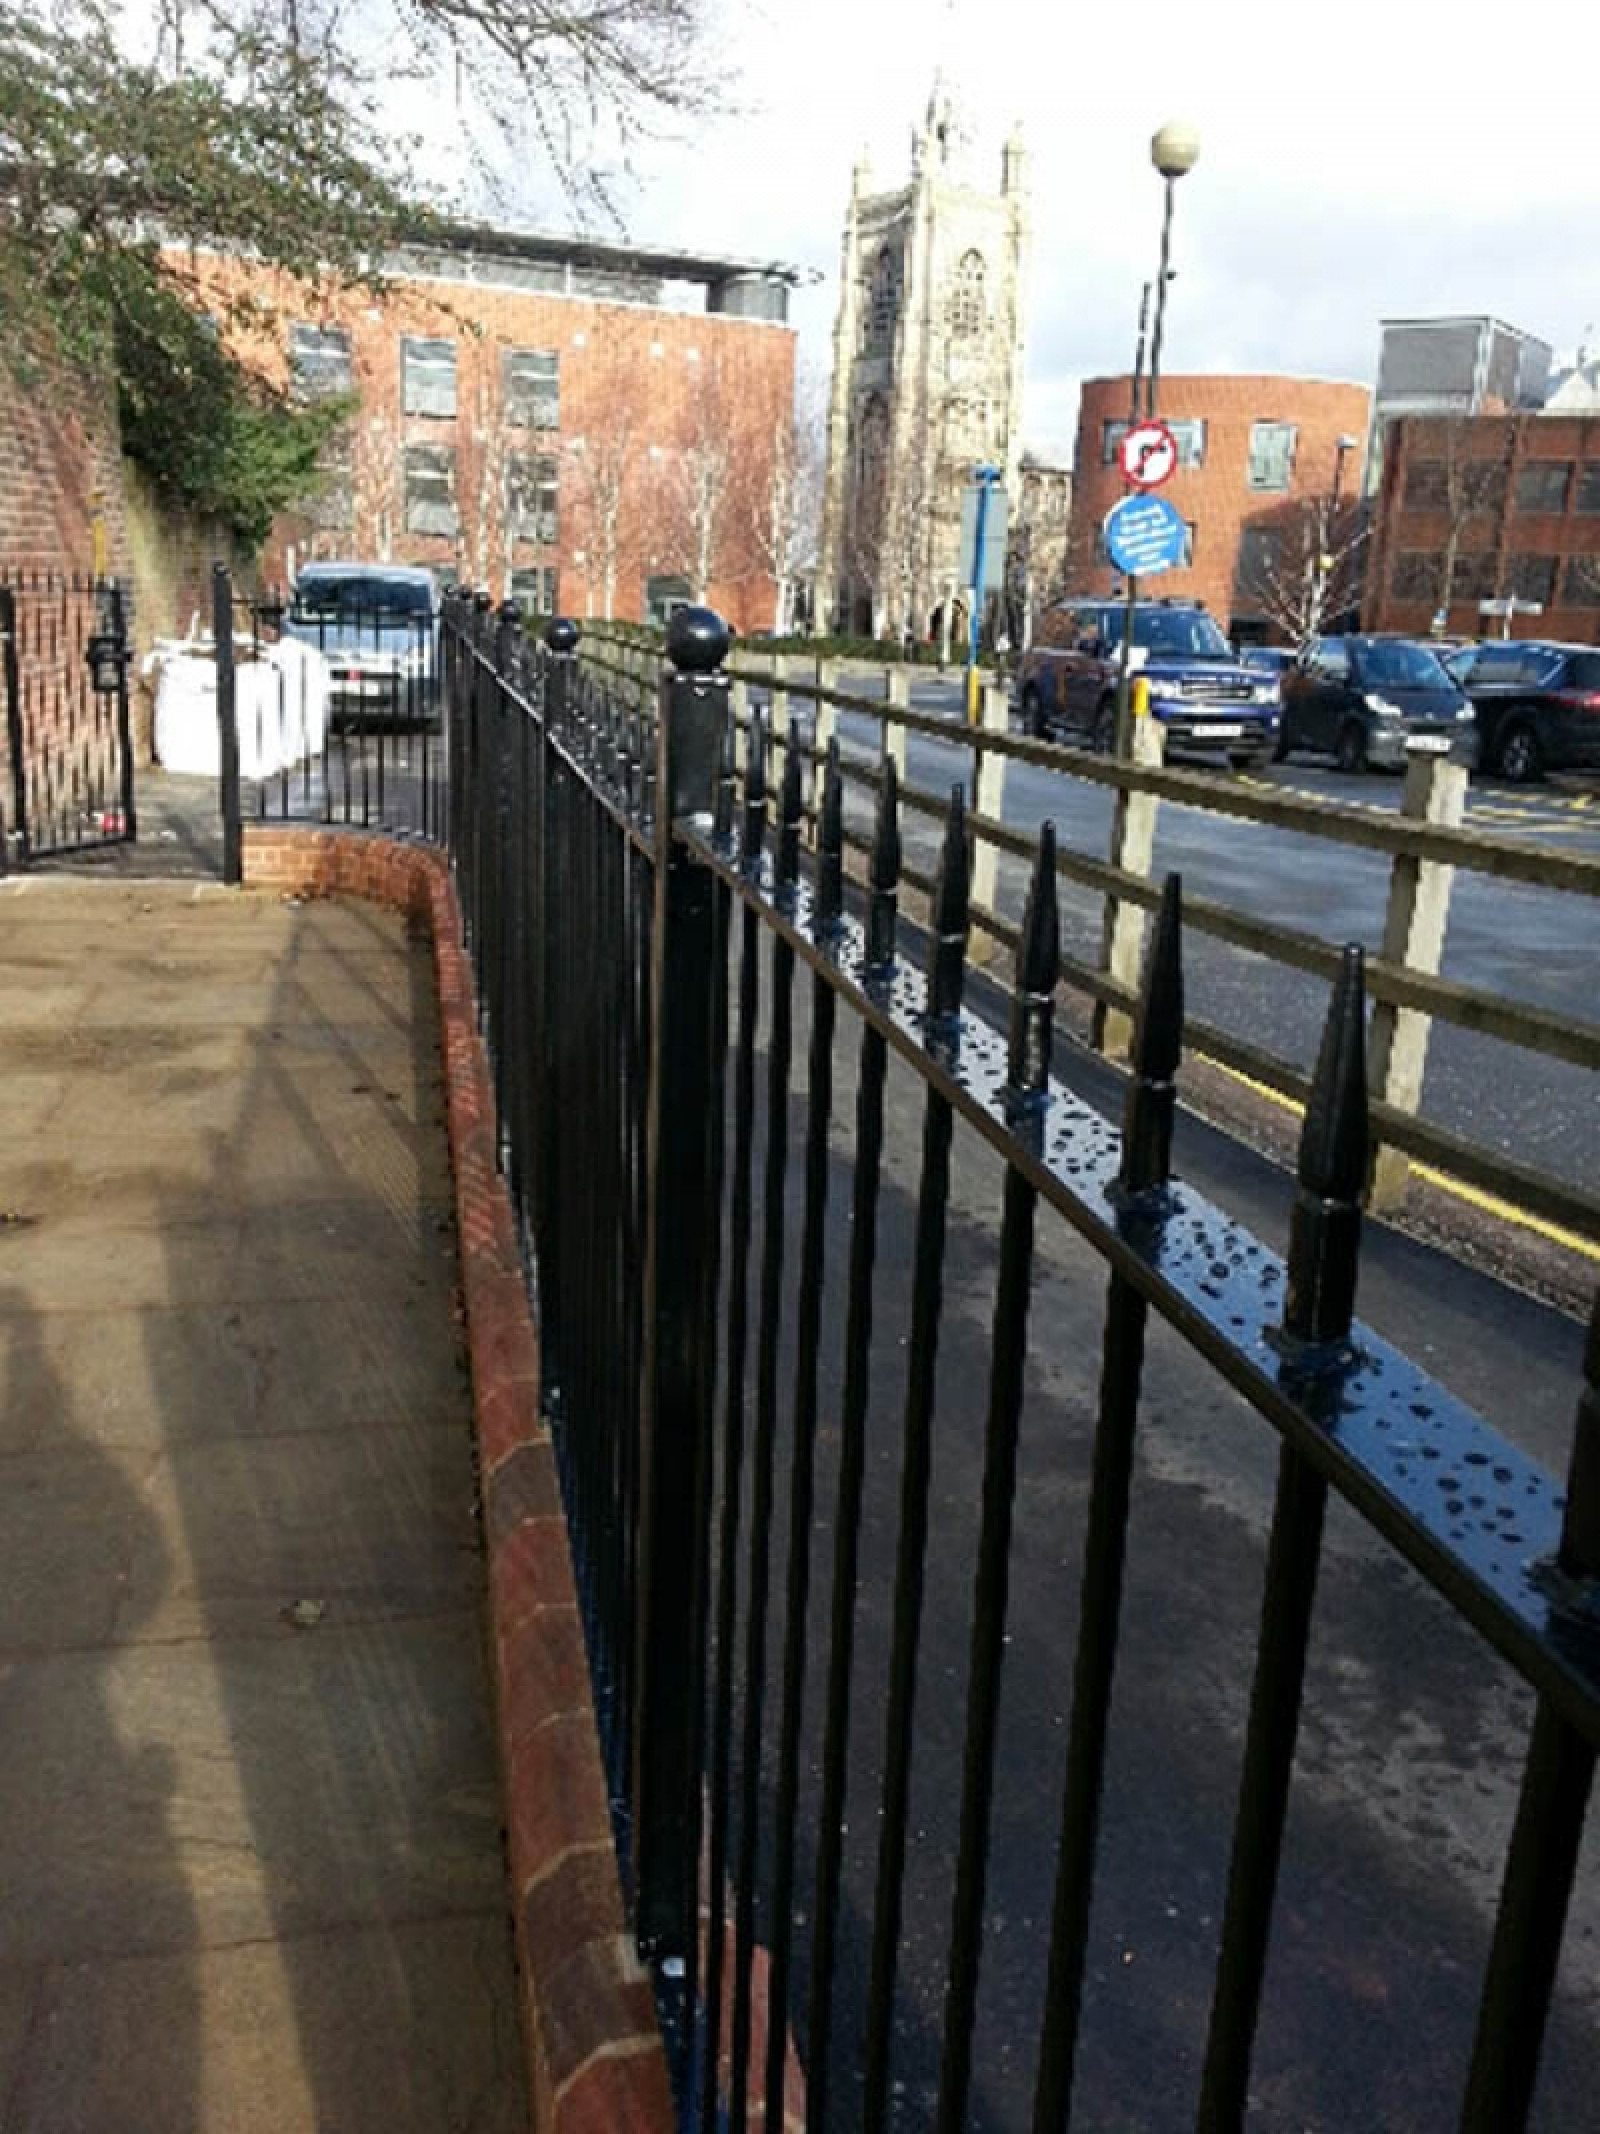 Railings provide edge to Norwich Assembly House tr...